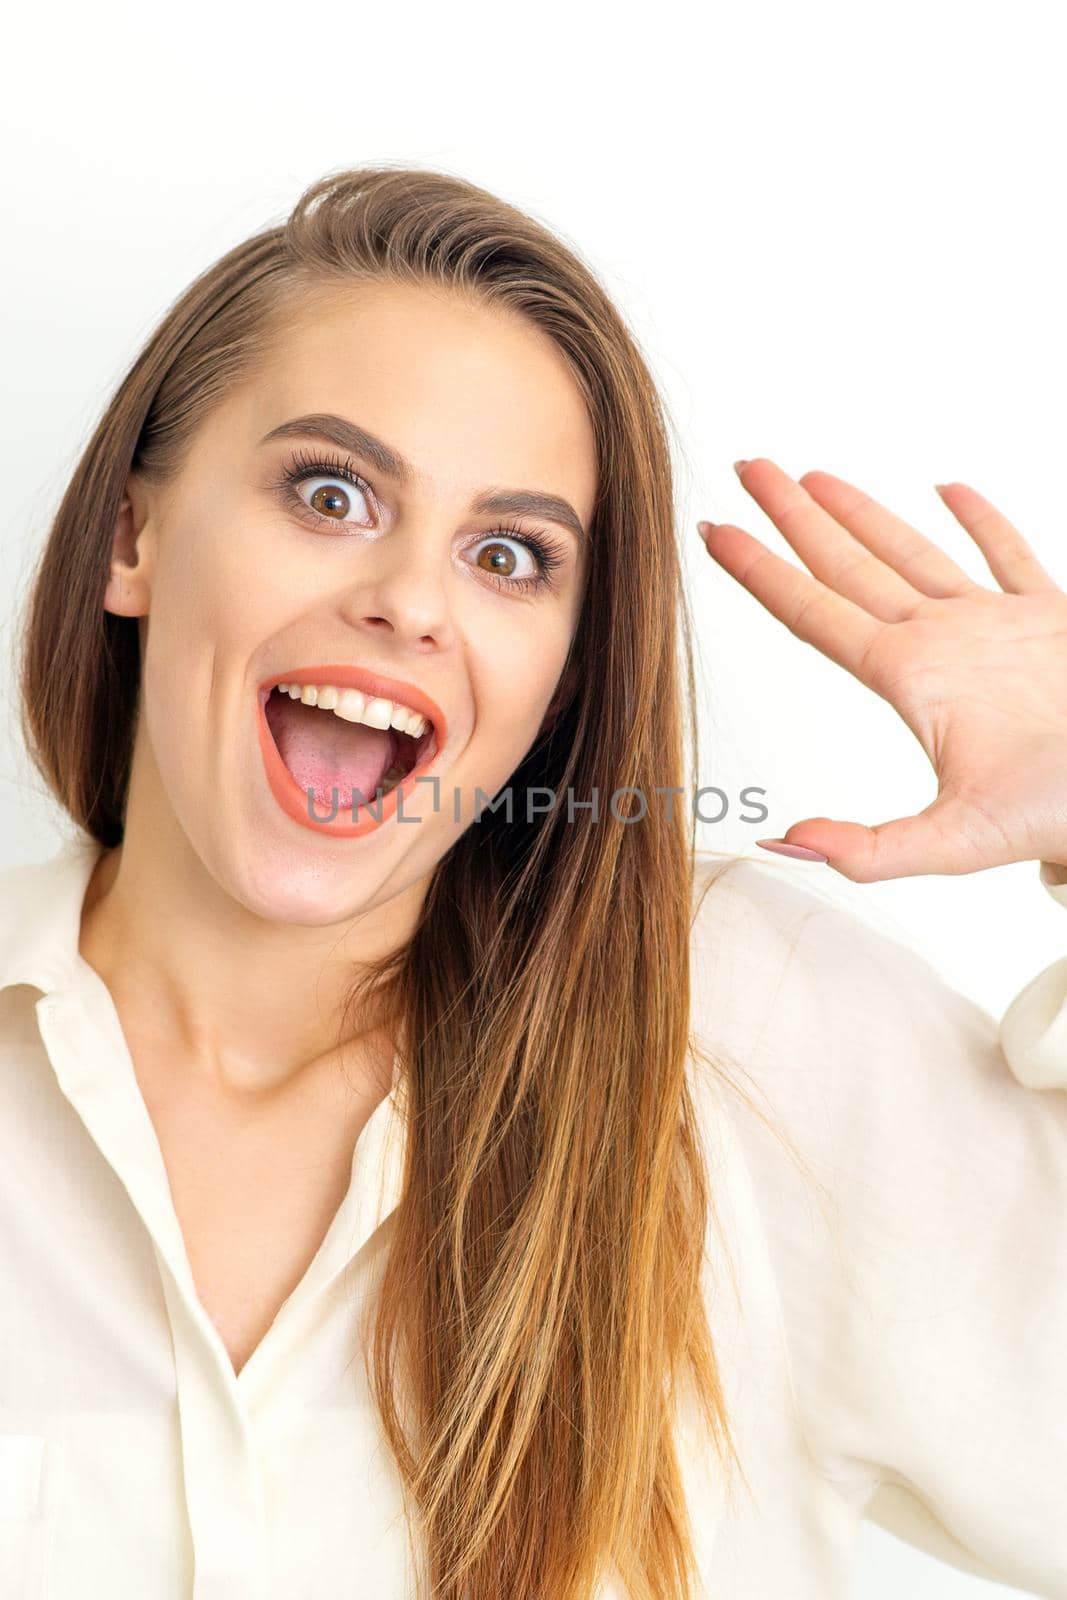 Portrait of young caucasian woman wearing white shirt raises hands and laughs positively with open mouth poses against a white background. by okskukuruza